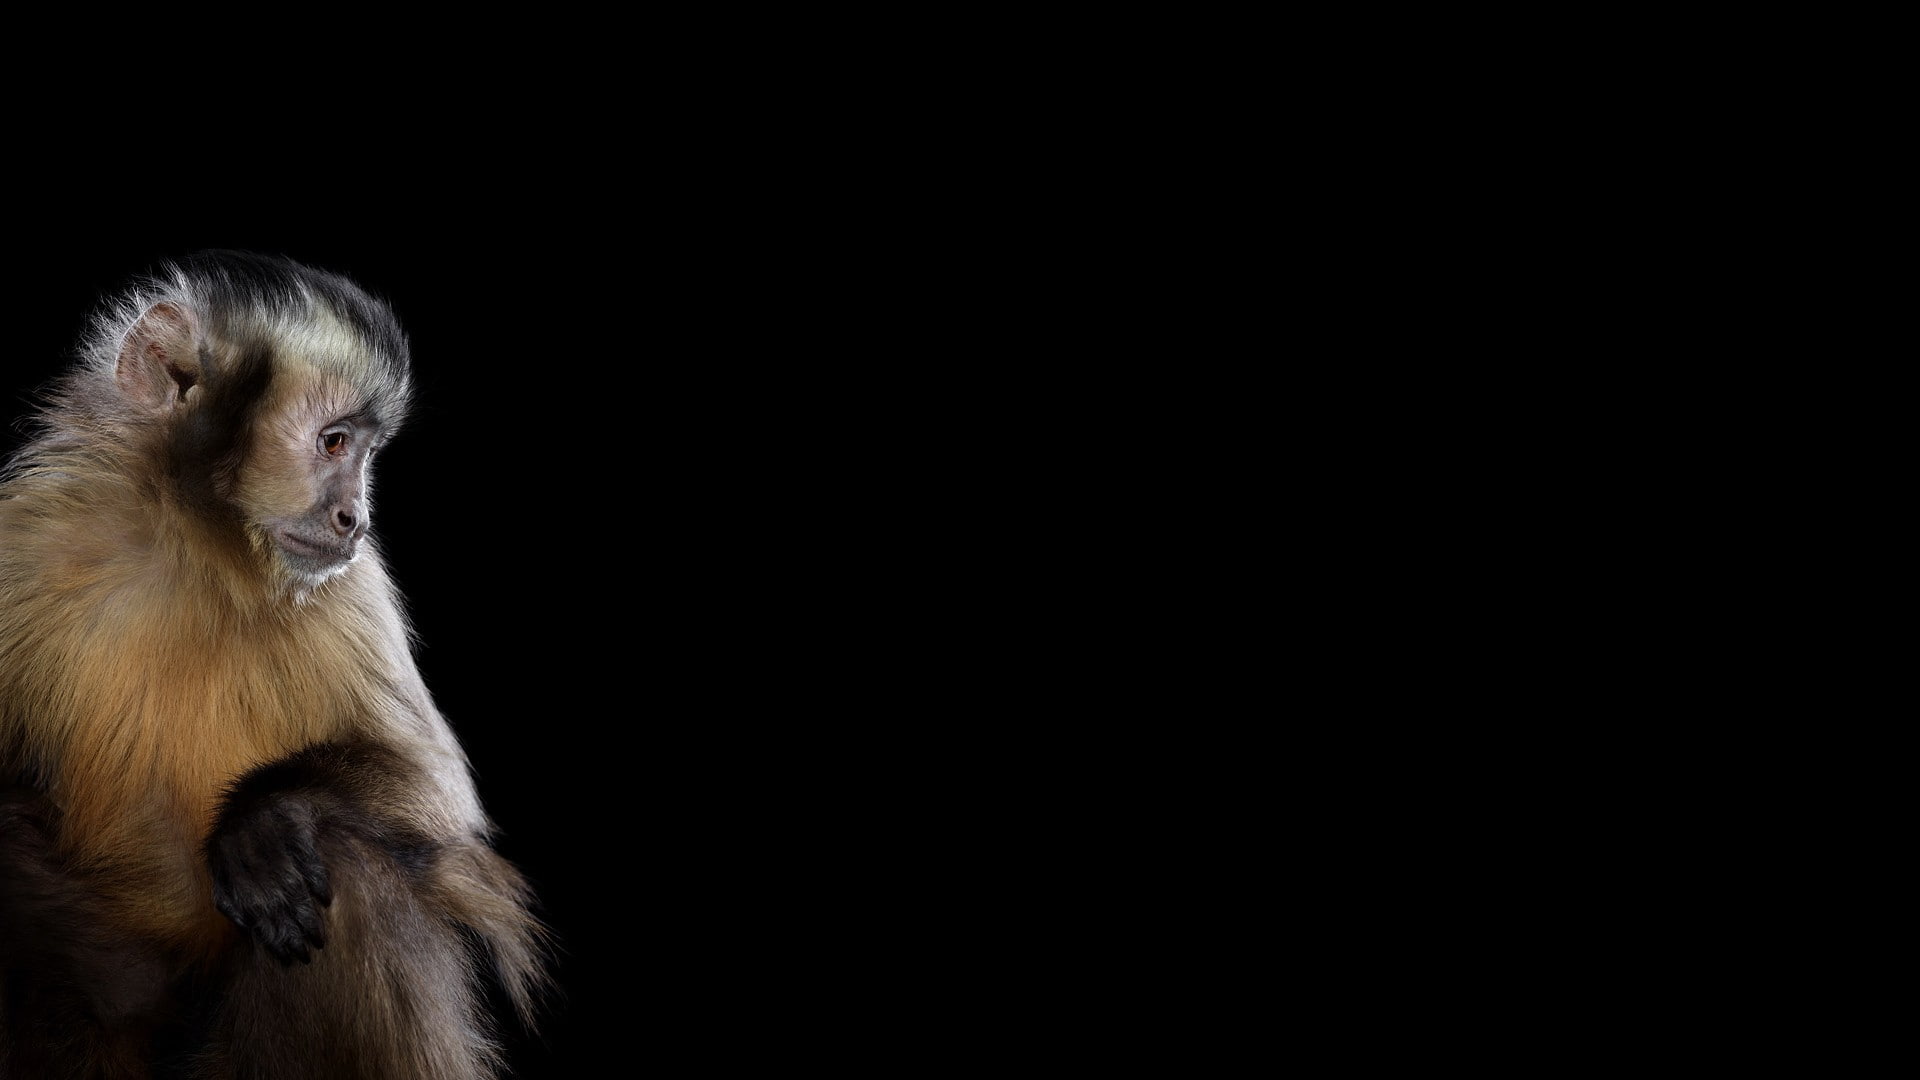 Black Background With Monkey - HD Wallpaper 